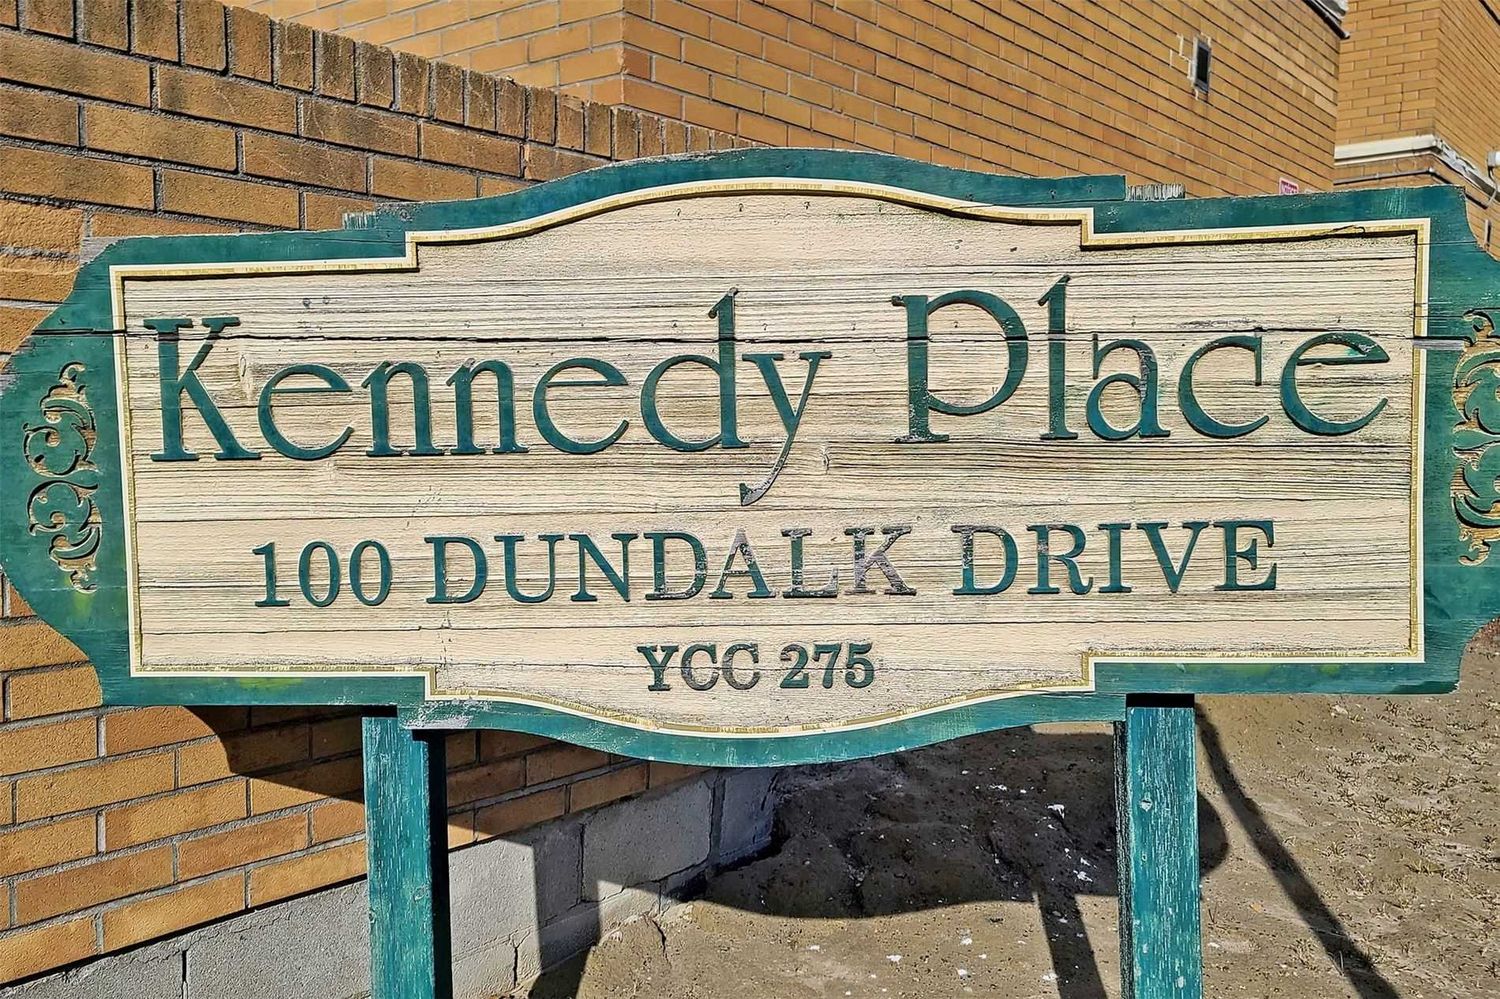 100 Dundalk Drive. Kennedy Place Condos is located in  Scarborough, Toronto - image #2 of 3